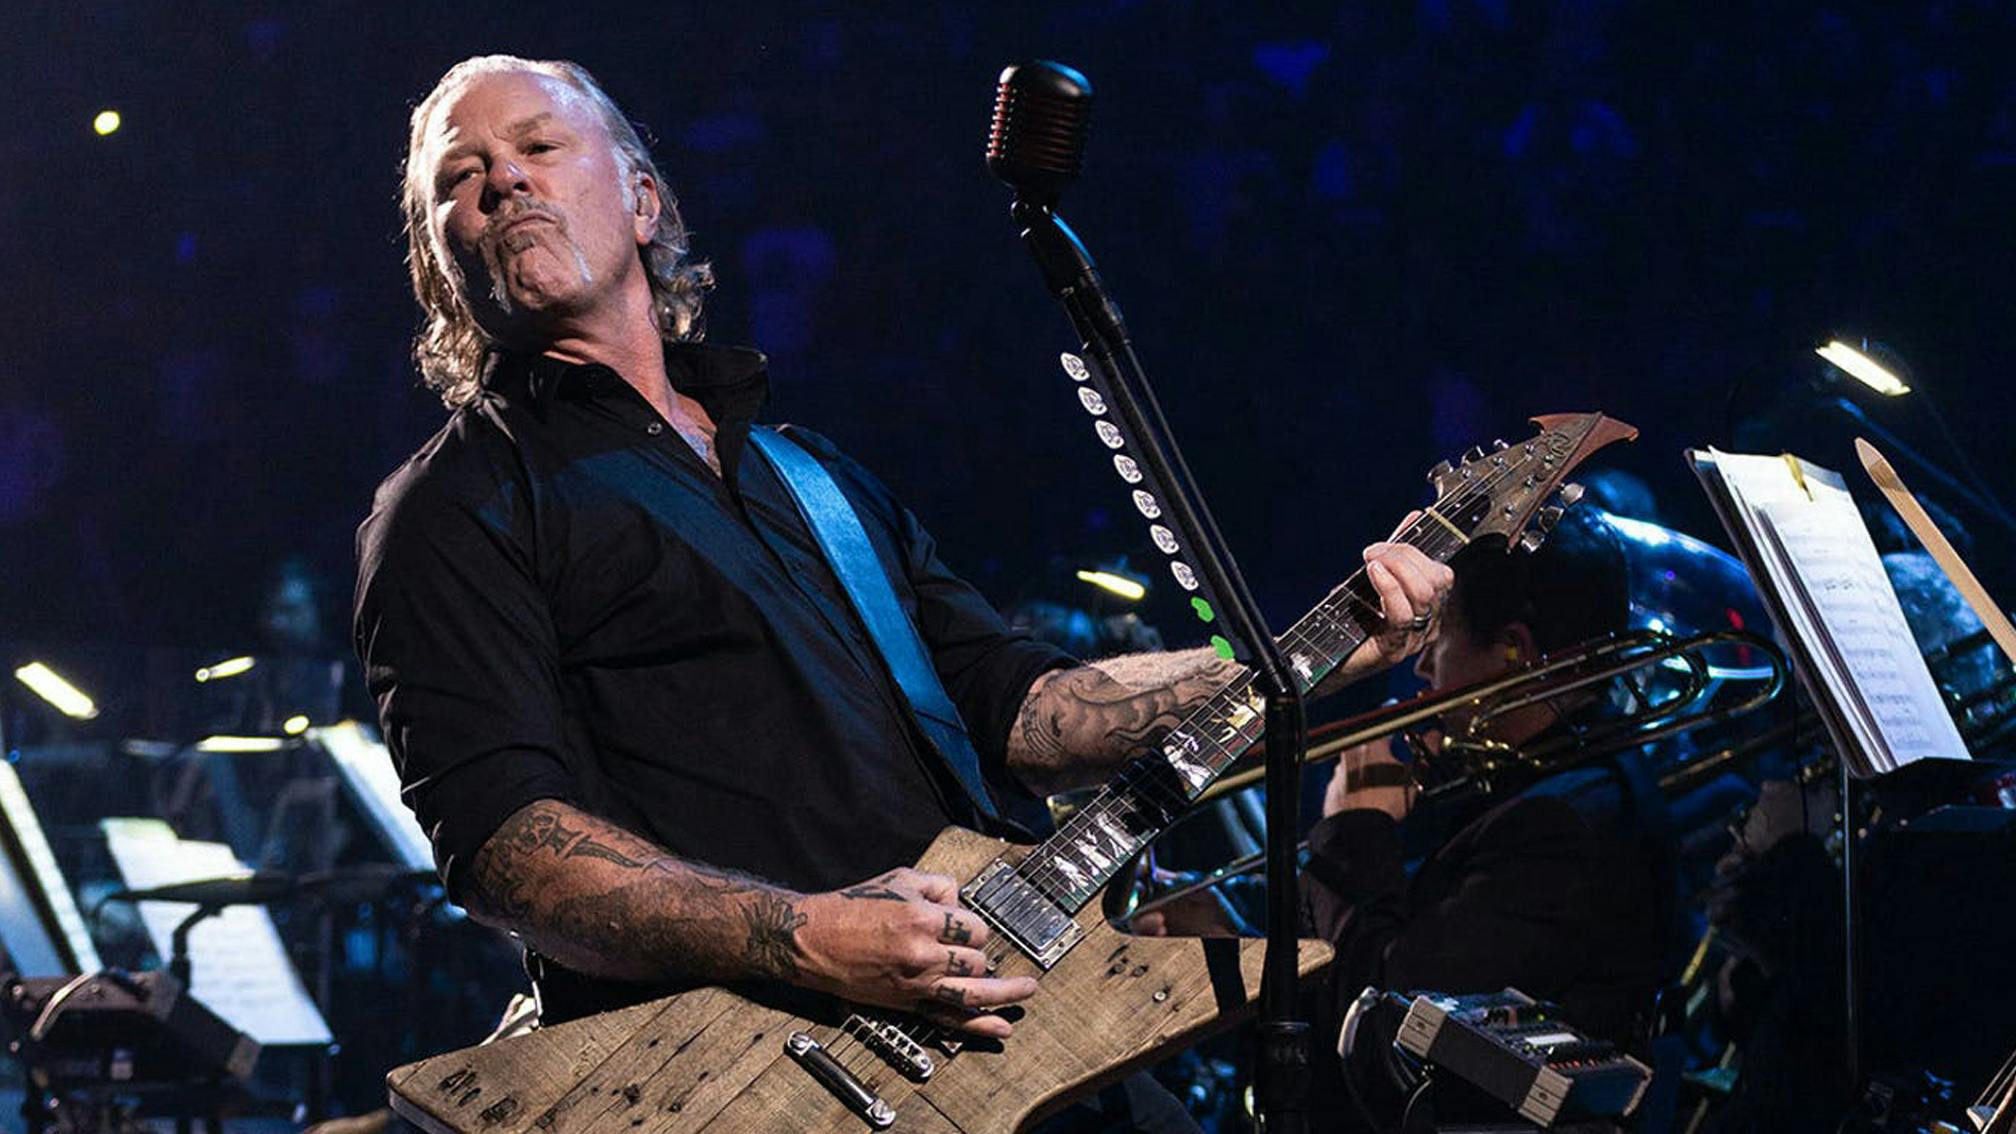 James Hetfield On Being A "Lone Wolf" During Lockdown: "I Miss People… As Much As I Say I Don’t, I Do"